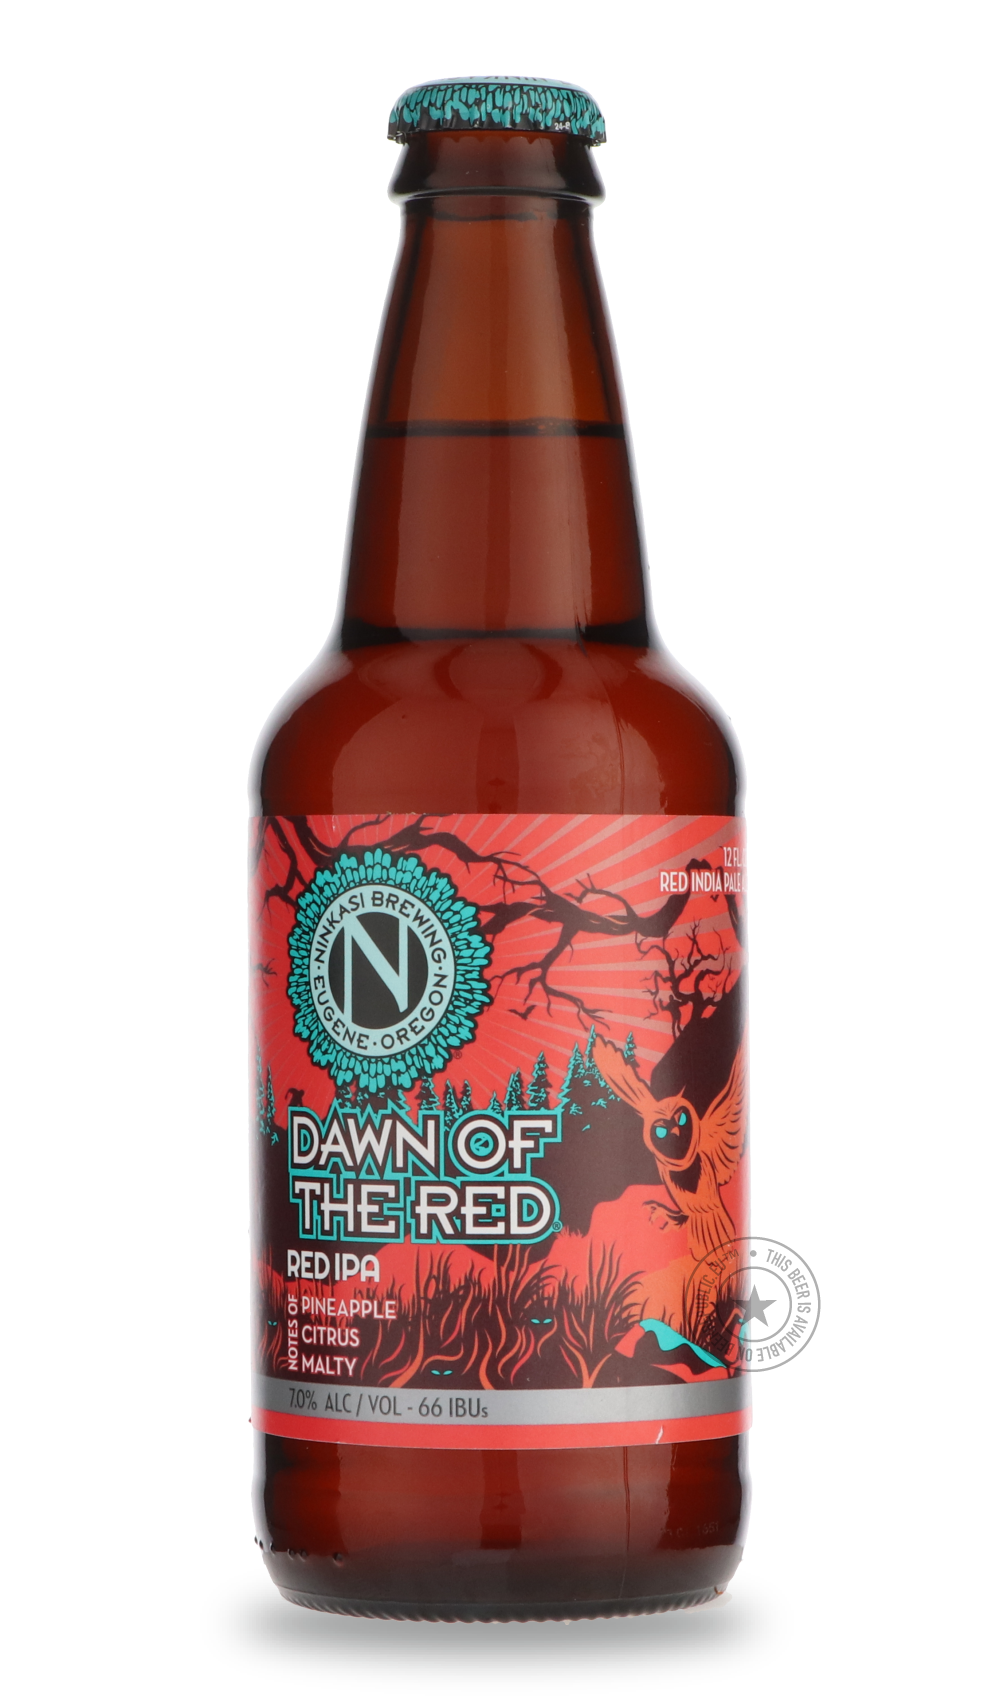 -Ninkasi- Dawn of the Red-IPA- Only @ Beer Republic - The best online beer store for American & Canadian craft beer - Buy beer online from the USA and Canada - Bier online kopen - Amerikaans bier kopen - Craft beer store - Craft beer kopen - Amerikanisch bier kaufen - Bier online kaufen - Acheter biere online - IPA - Stout - Porter - New England IPA - Hazy IPA - Imperial Stout - Barrel Aged - Barrel Aged Imperial Stout - Brown - Dark beer - Blond - Blonde - Pilsner - Lager - Wheat - Weizen - Amber - Barley 